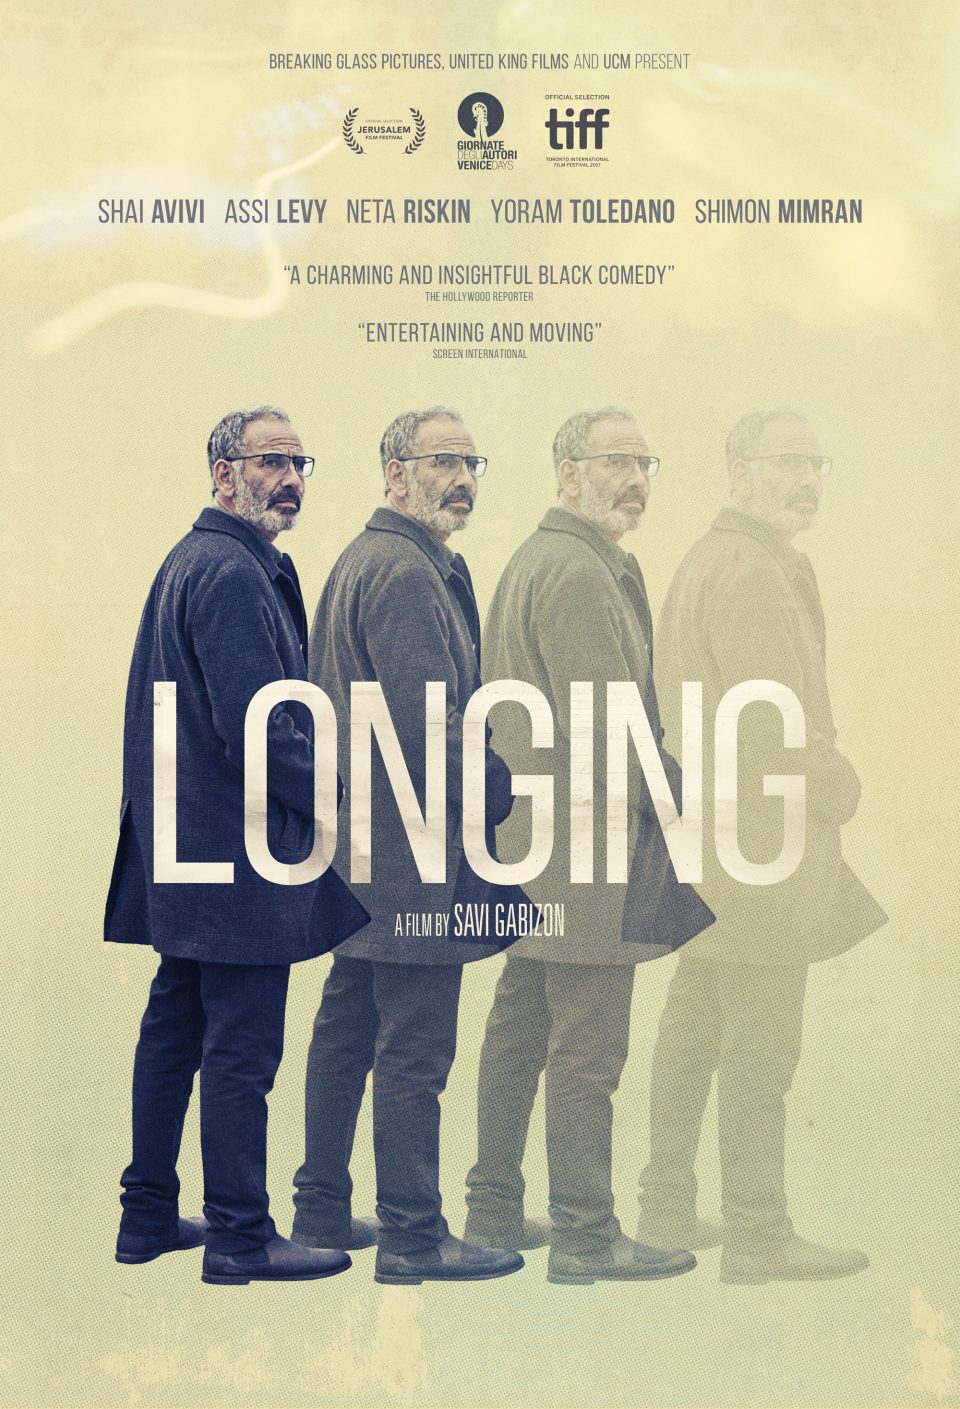 Movie cover for "Longing"; four images of varying opacity of the same man.